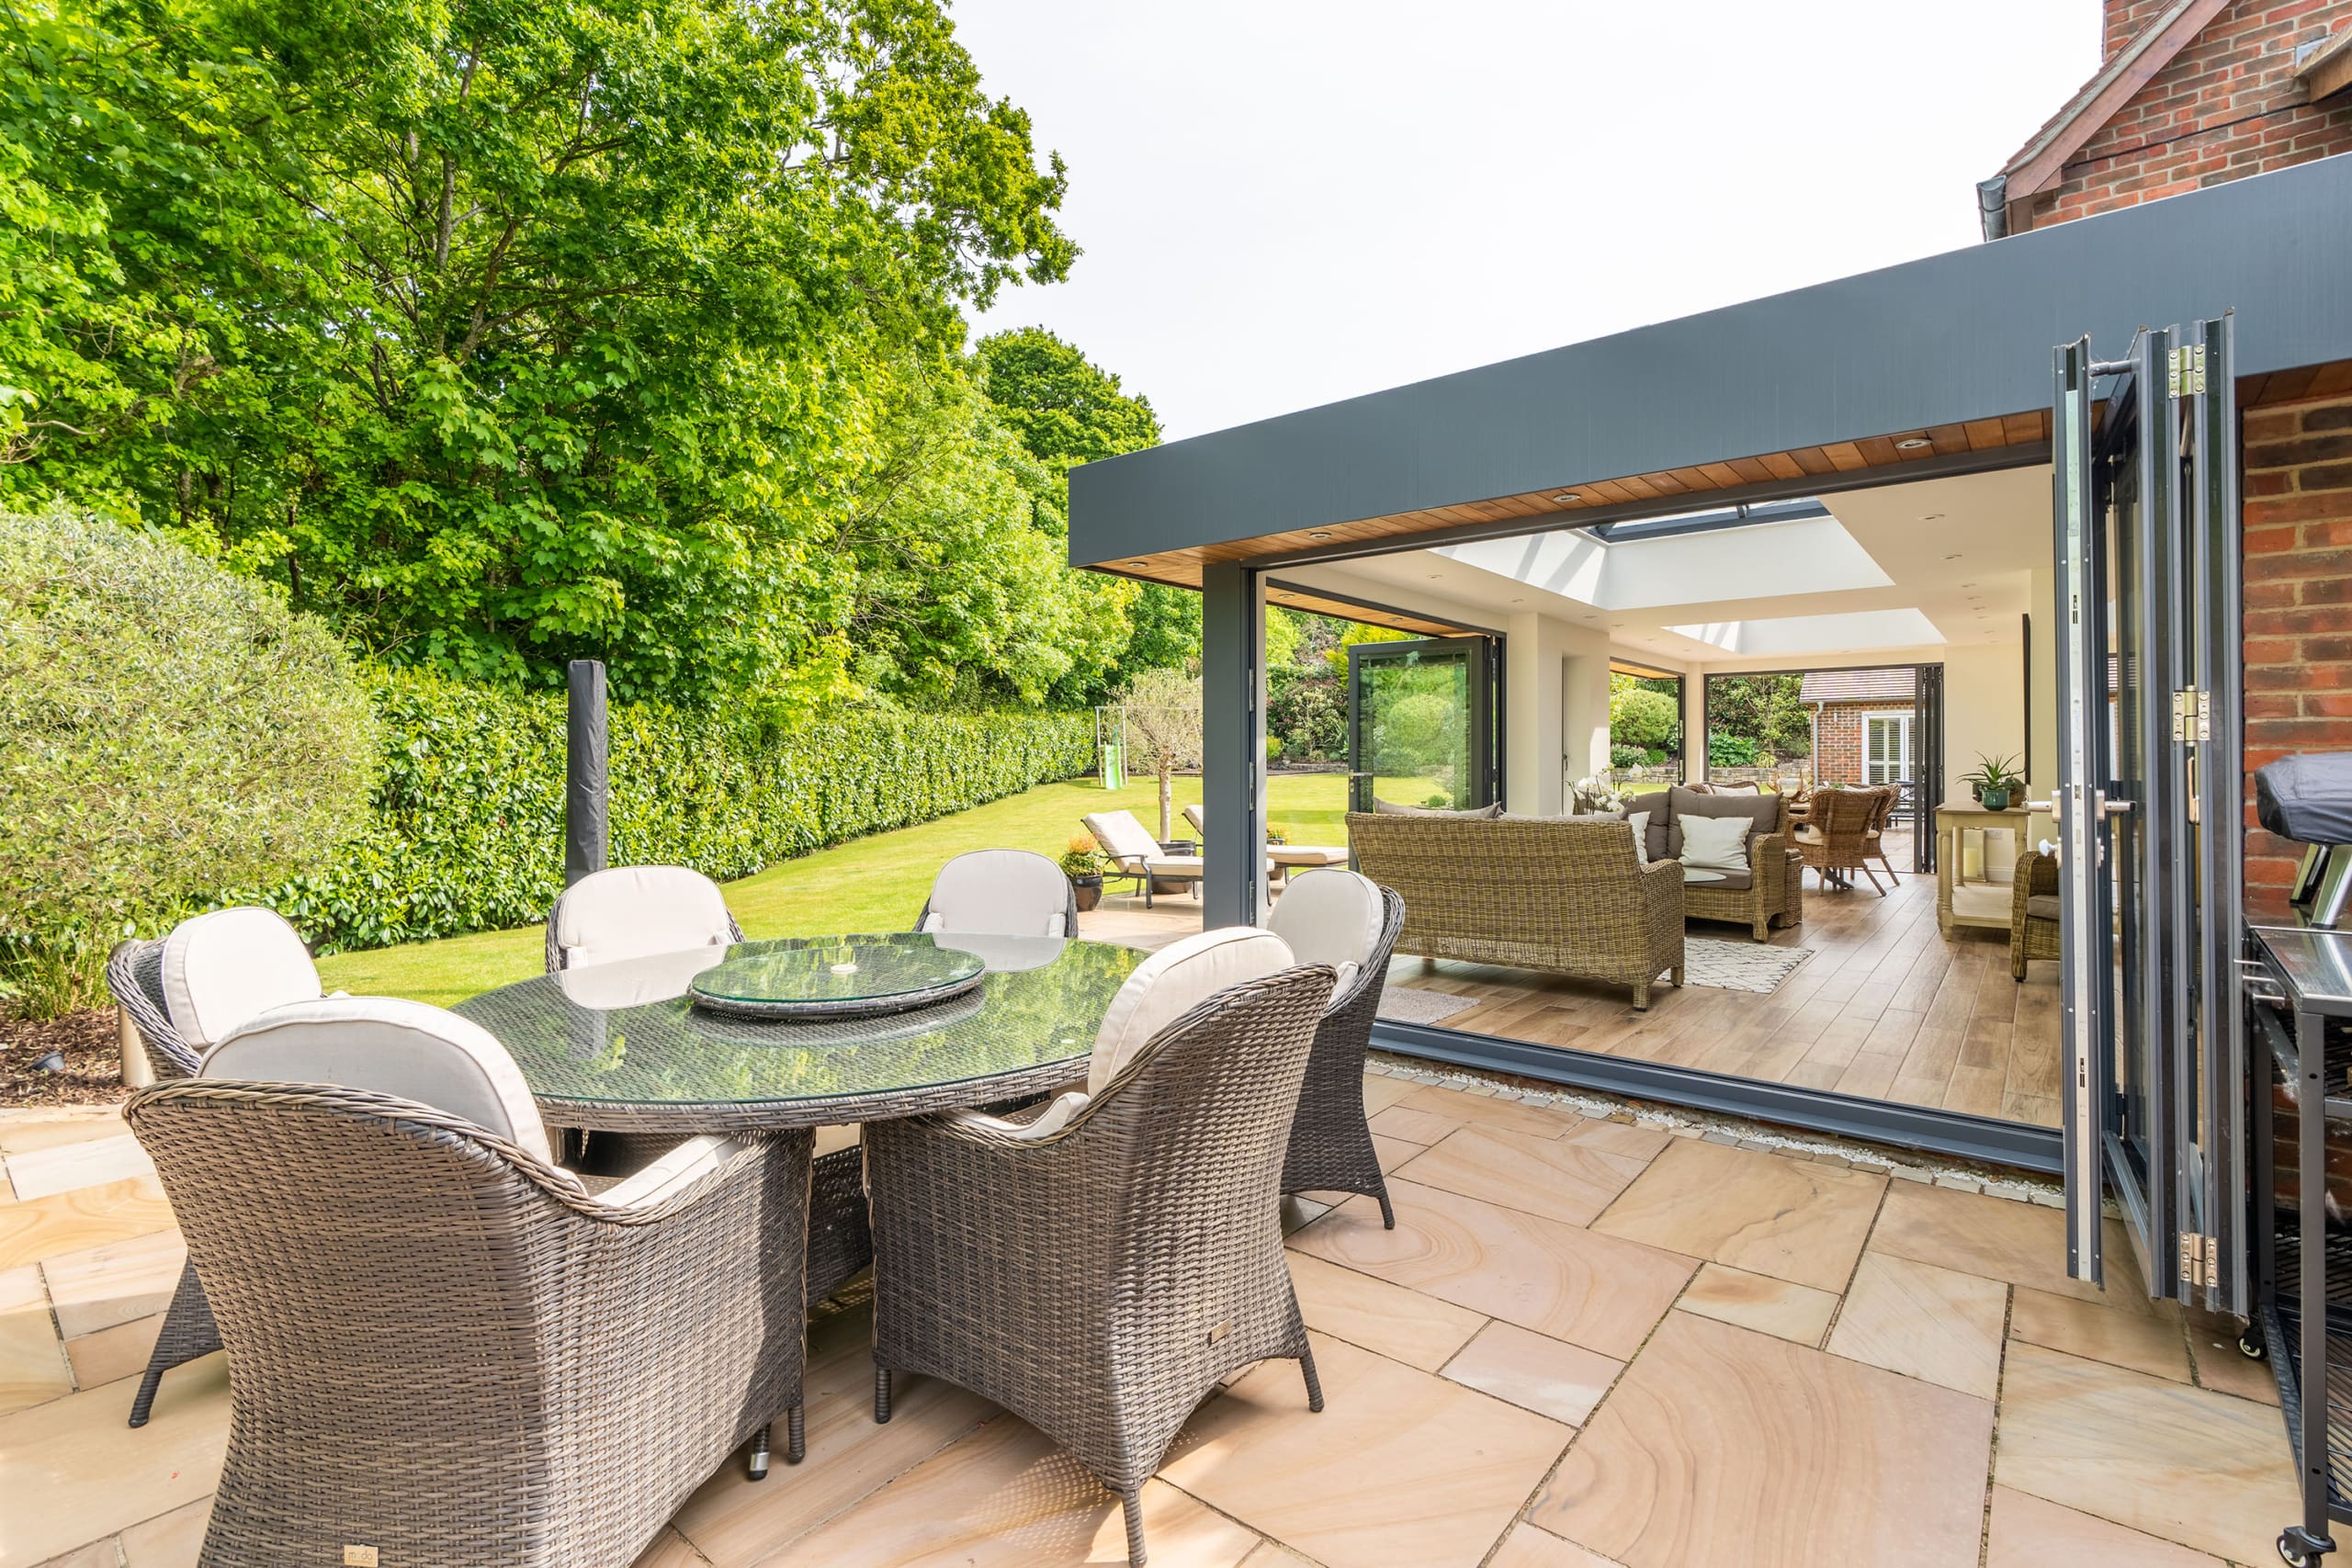 View of a orangery extension with bifolding doors and stone slab patio with rattan furniture.